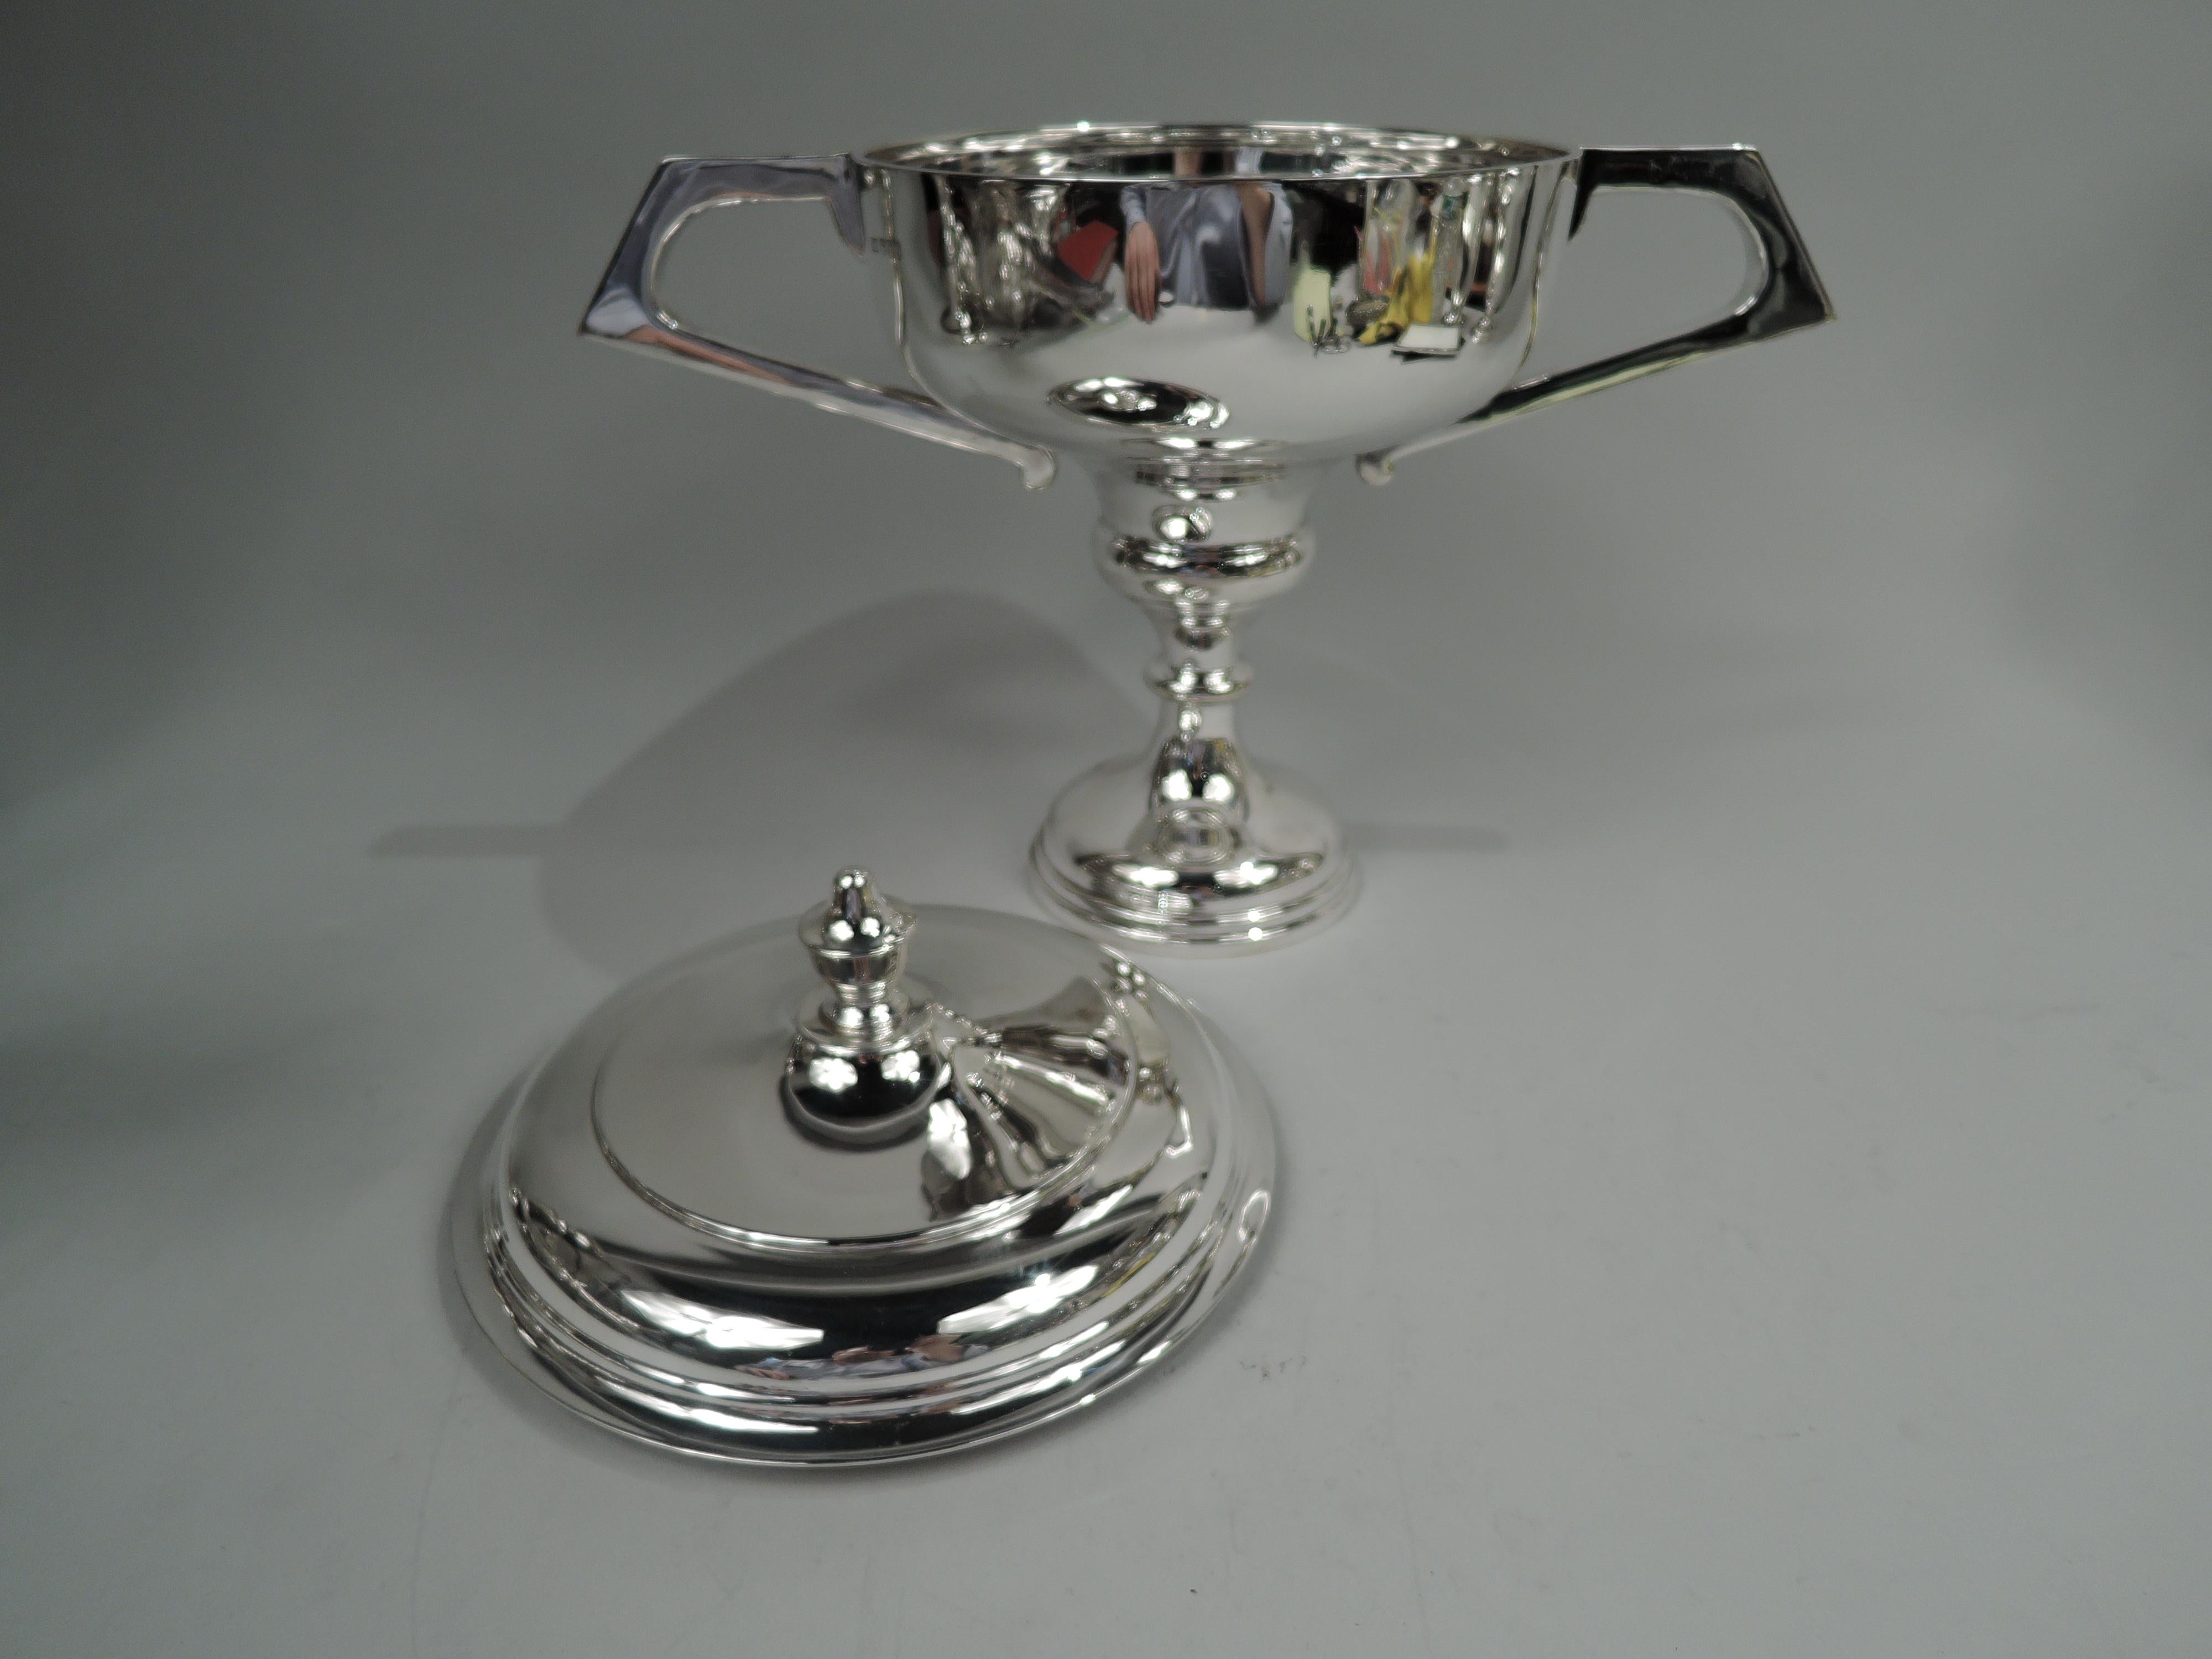 Elizabeth II sterling silver trophy cup. Made by Edward Viner in Sheffield in 1963. Wide shallow bowl with canted and elongated bracket side handles; cover raised with vasiform finial. Knopped baluster on stepped and domed foot. Fully marked.